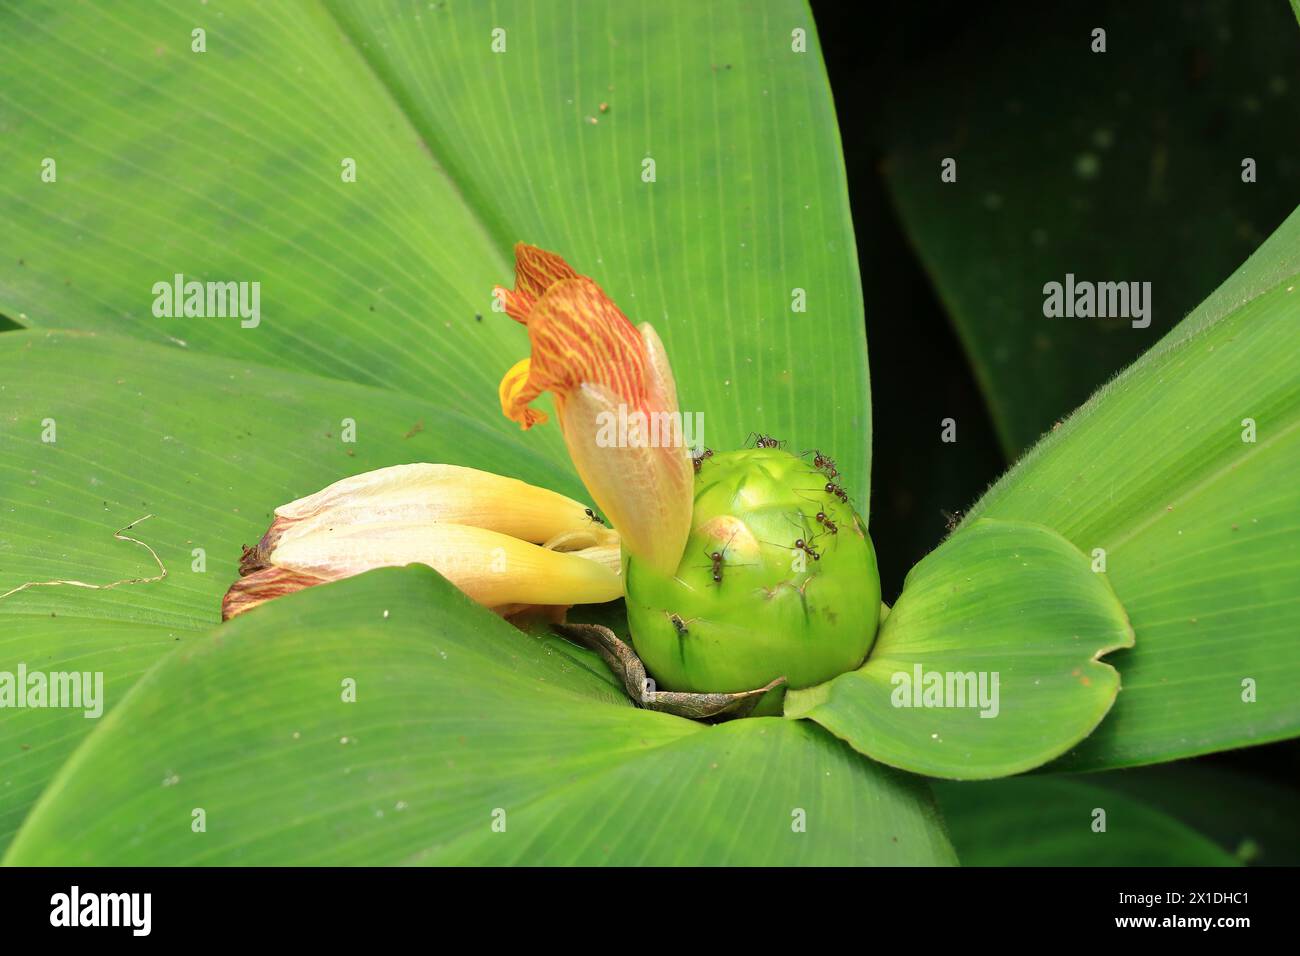 close-up of Stepladder ginger (Costus malortieanus) in a tropical garden in Bali, Indonesia Stock Photo